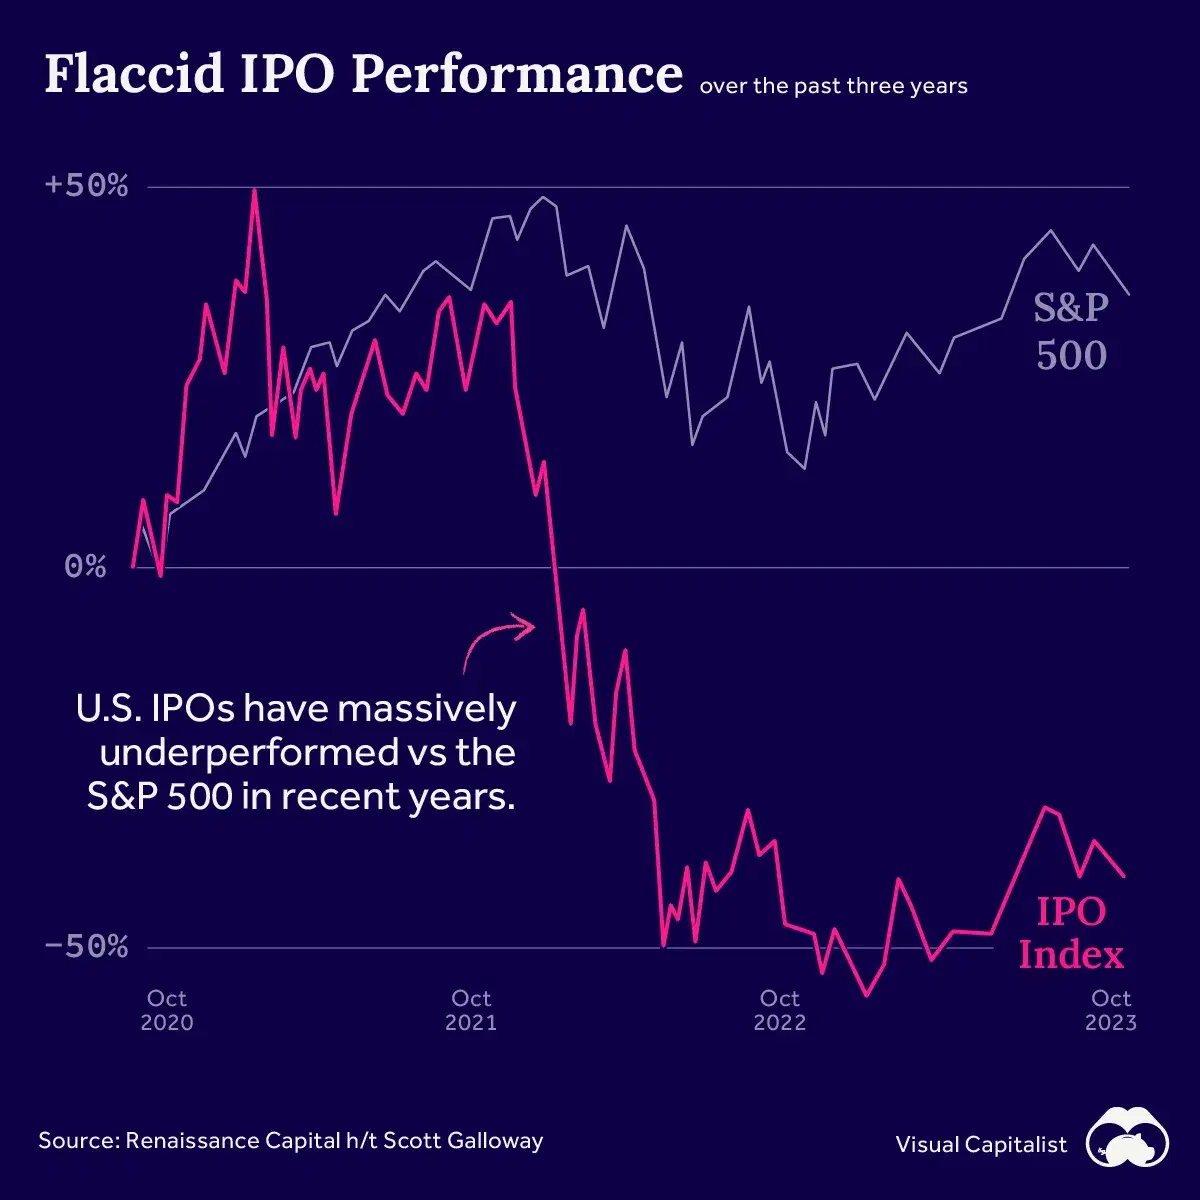 The Last Three Years Have Not Been Kind to IPOs